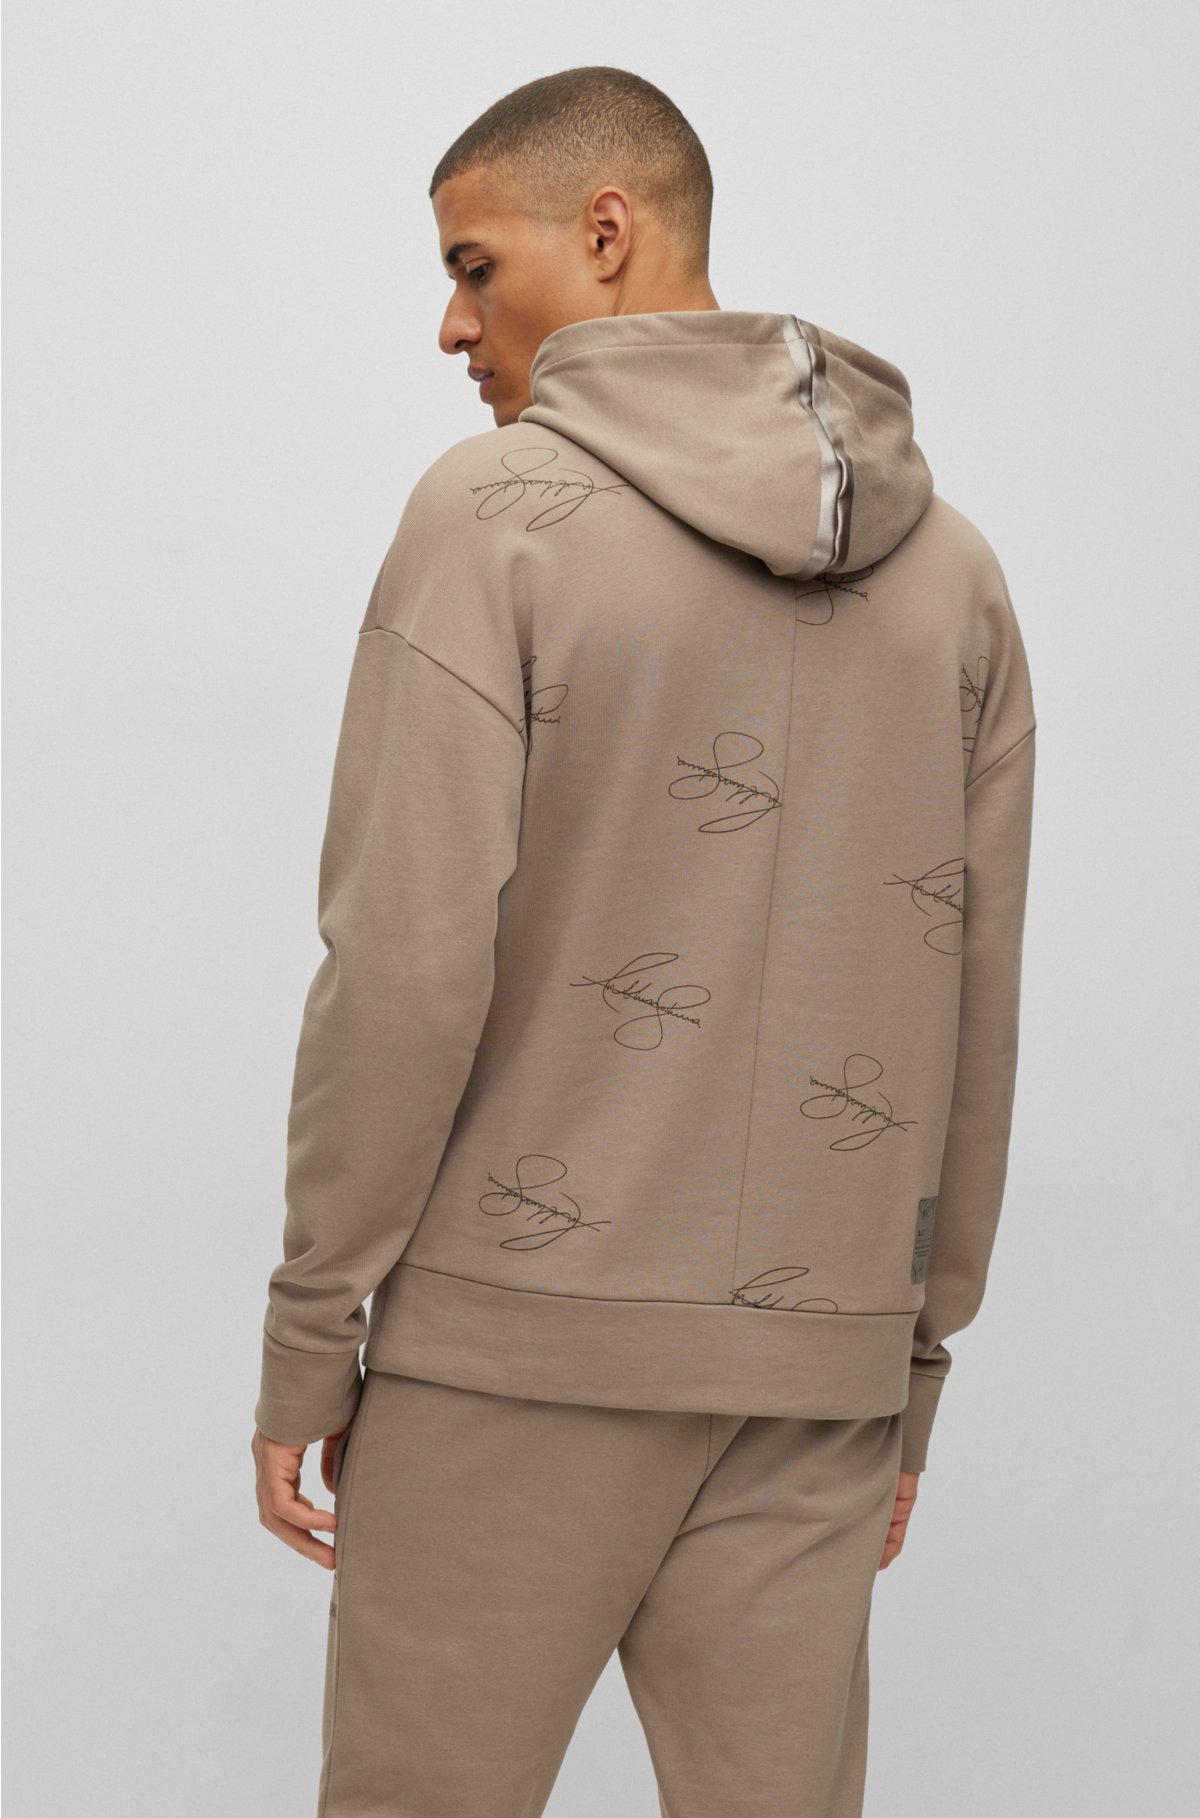 BOSS - collaborative x cotton AJBXNG hoodie branding with relaxed-fit BOSS